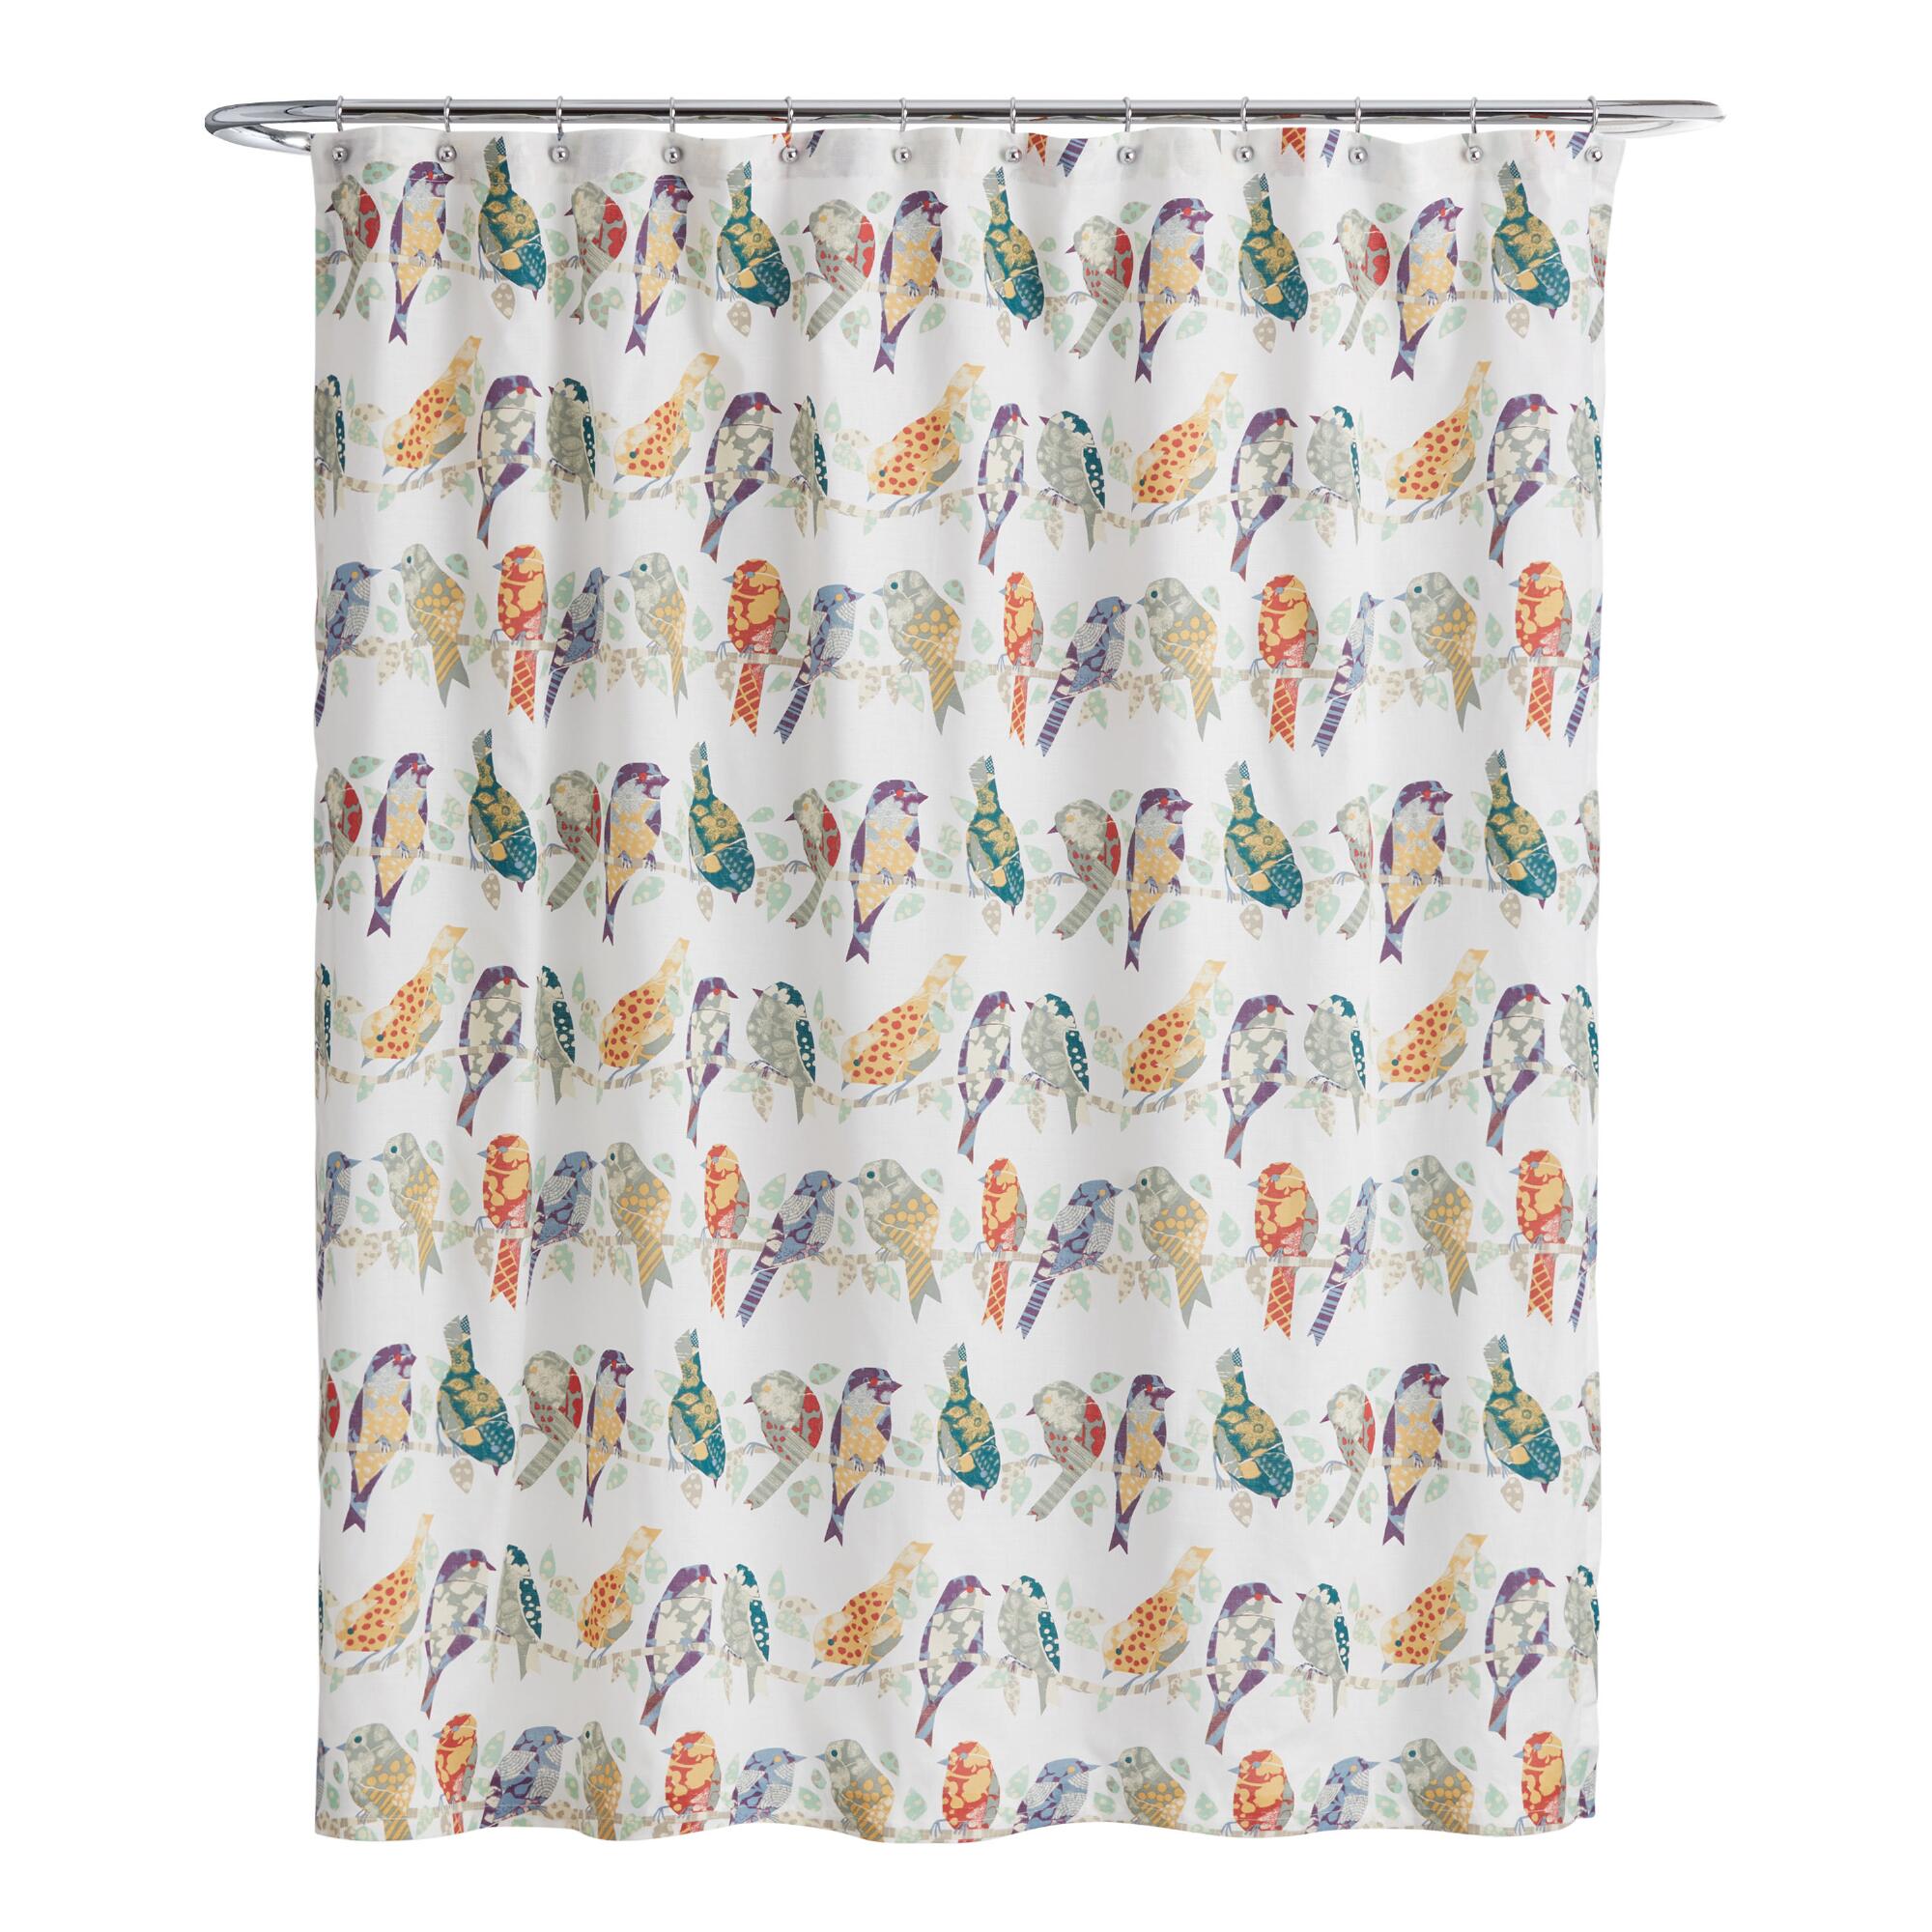 Collingswood Shower Curtain - Cotton by World Market